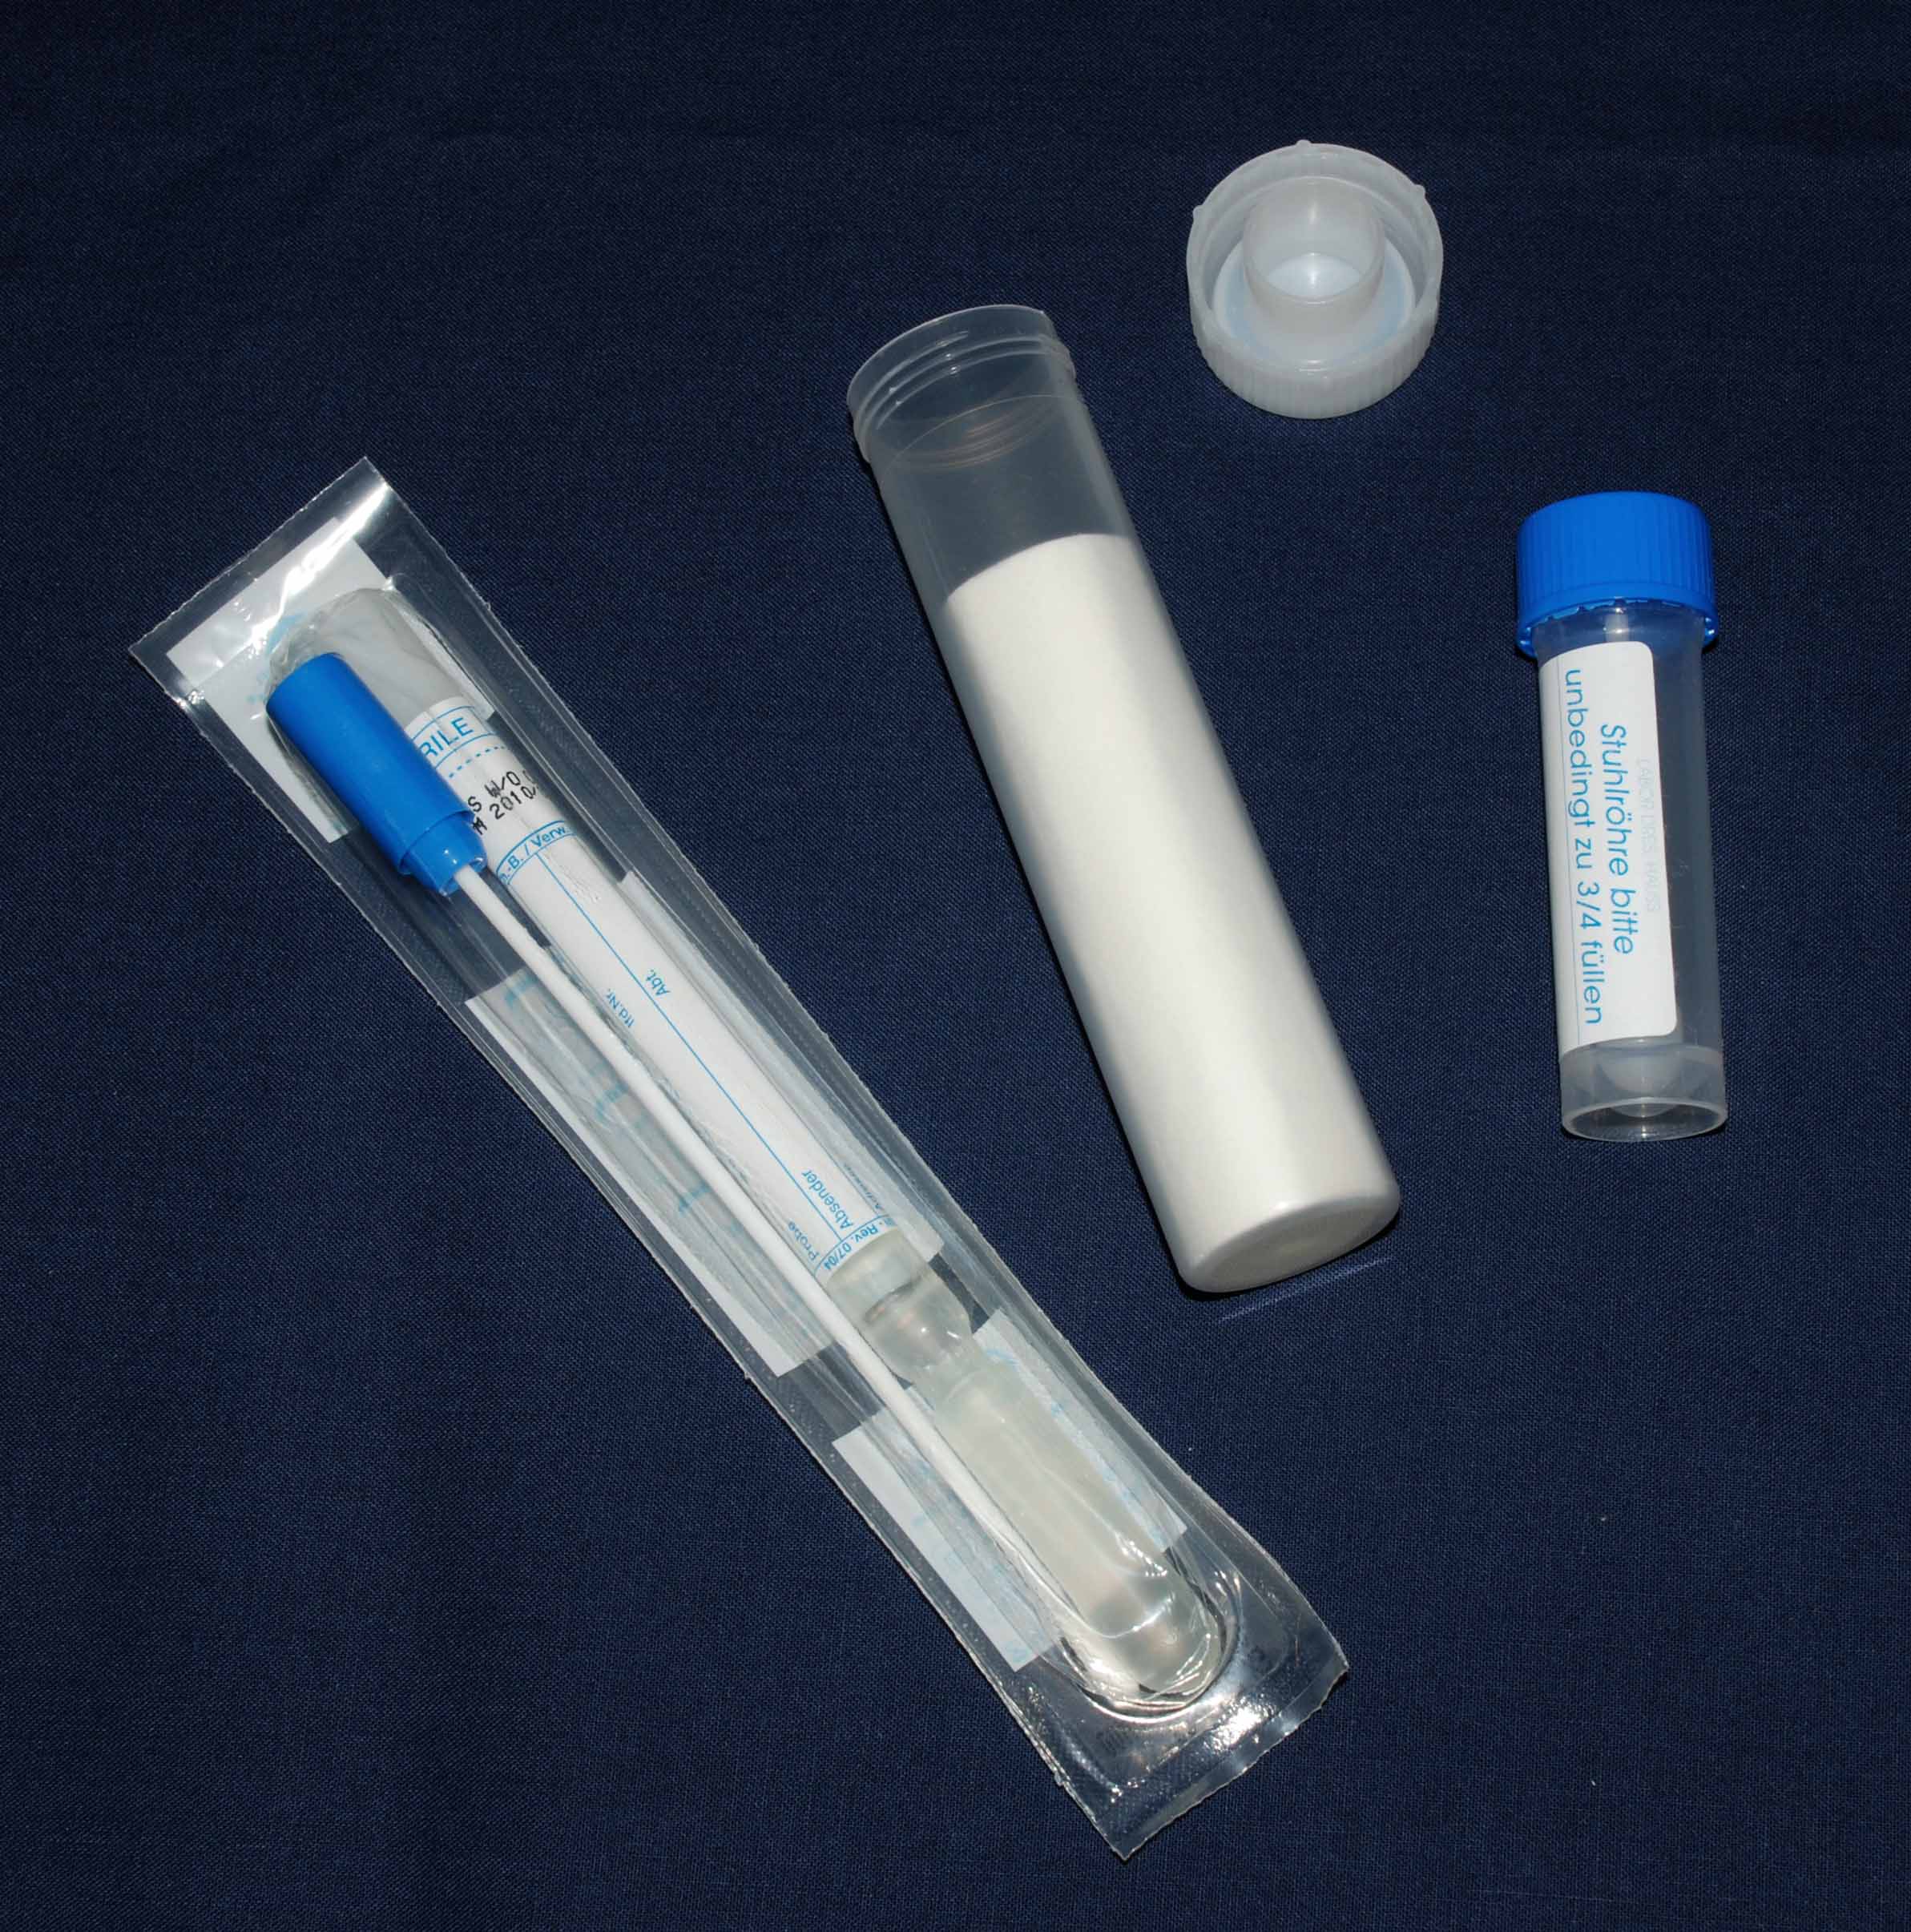 Stool sample jar with security pack and mouth swab (photo Artomedes)